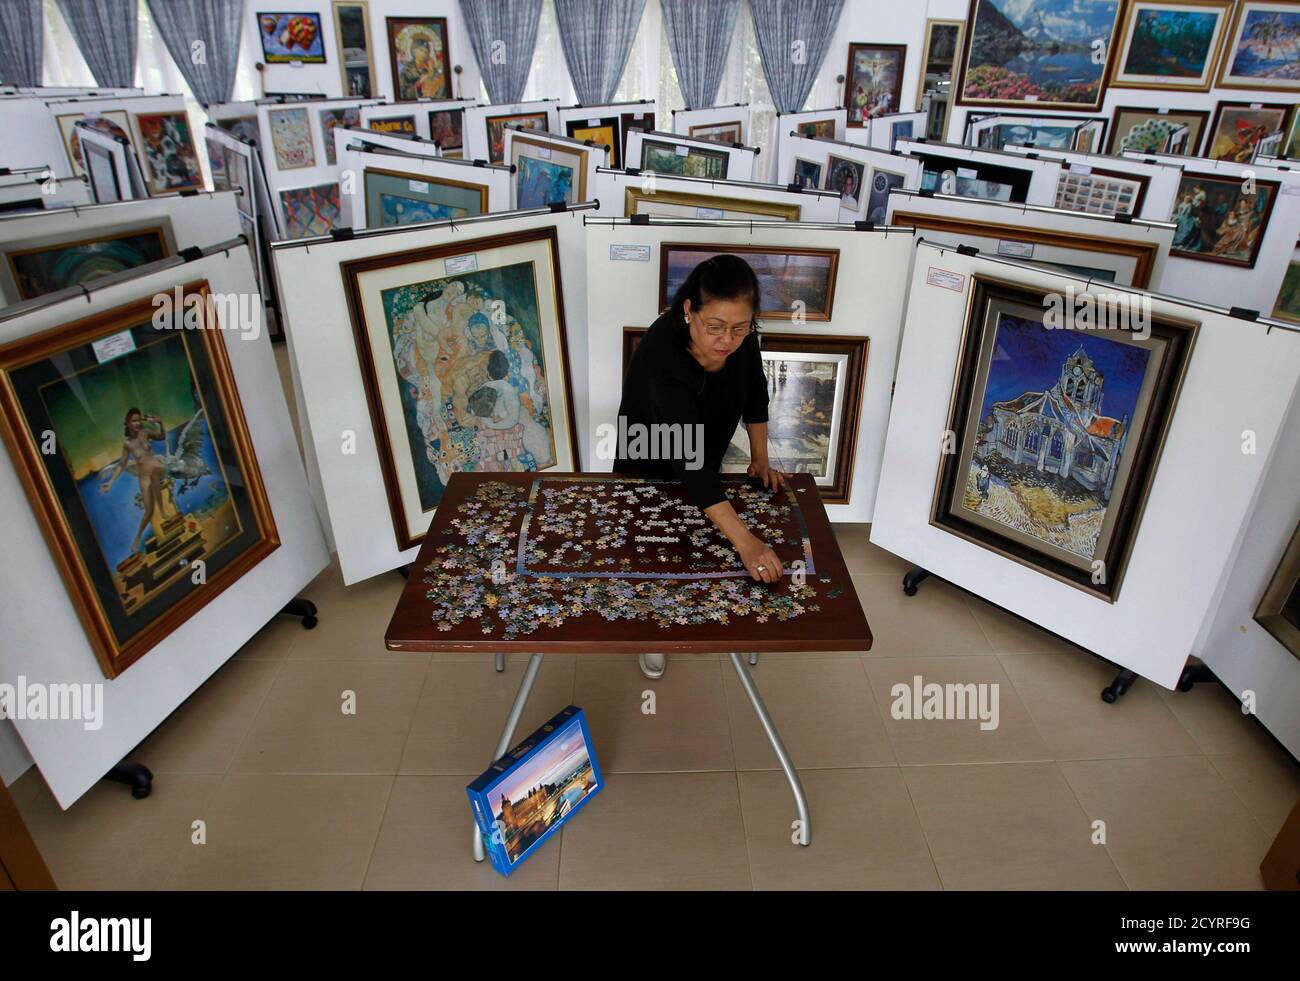 Filipino businesswoman Gina Lacuna pieces together a thousand-piece jigsaw  puzzle of La Seine, Paris, inside her museum in Tagaytay city, south of  Manila July 24, 2012. Lacuna collects and pieces together jigsaw